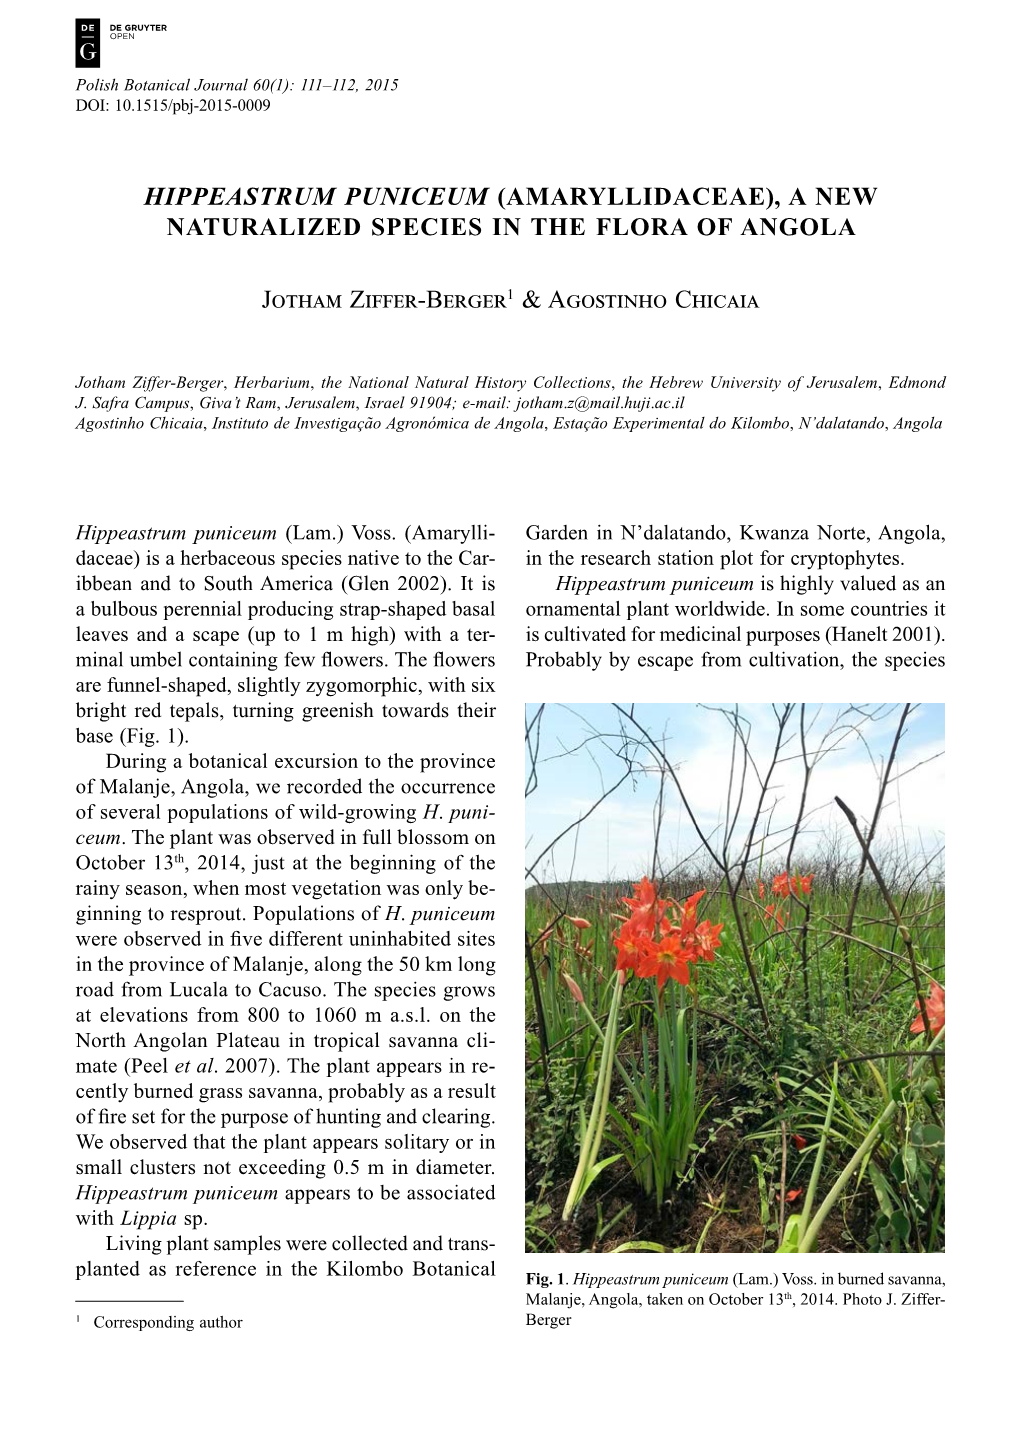 Hippeastrum Puniceum (Amaryllidaceae), a New Naturalized Species in the Flora of Angola